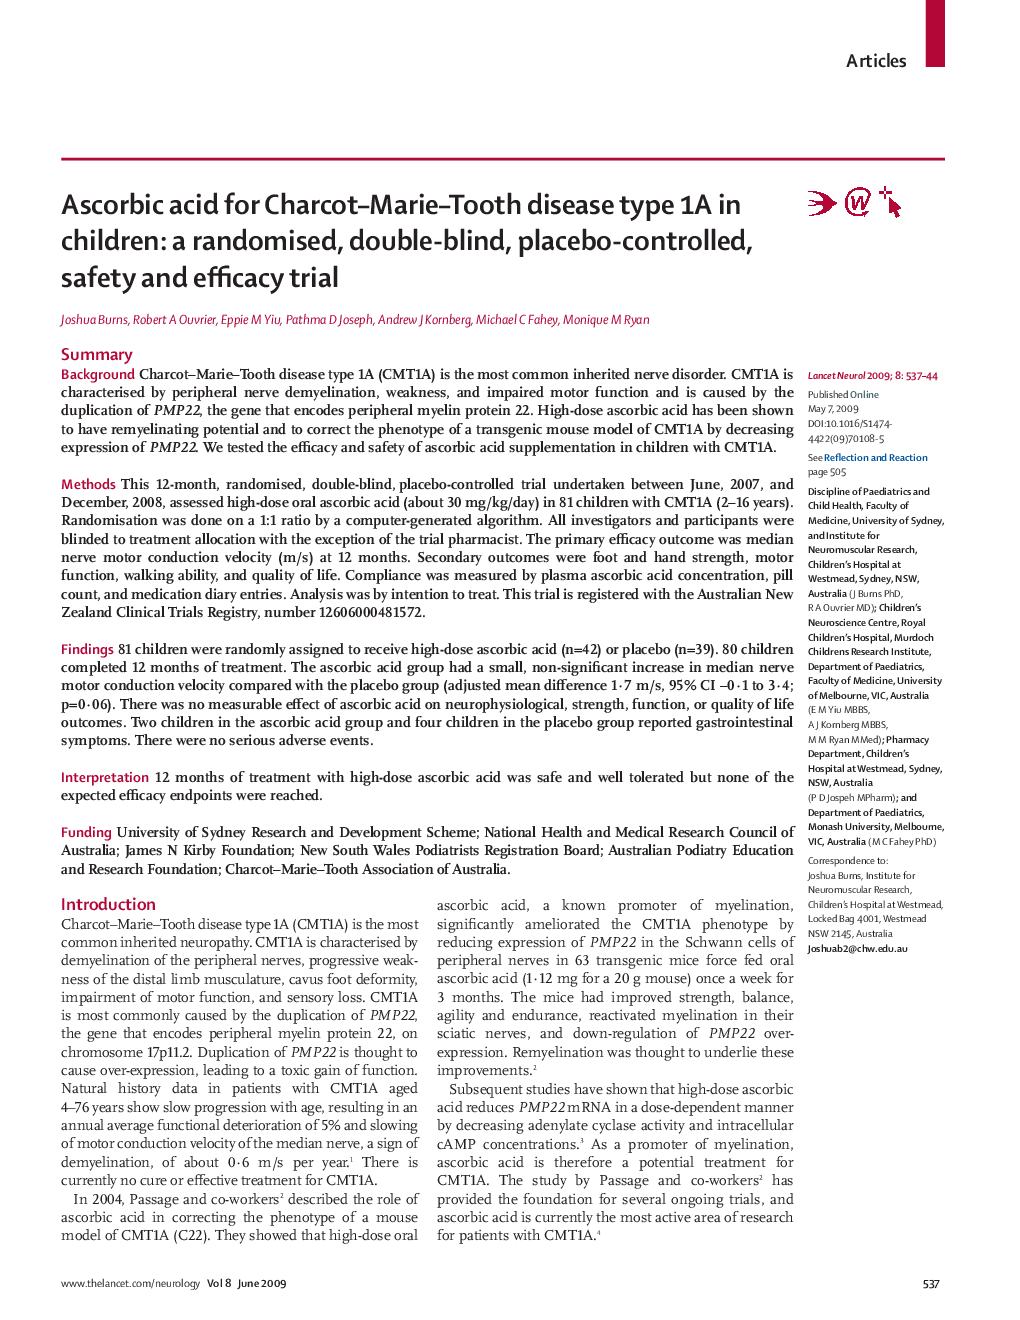 Ascorbic acid for Charcot–Marie–Tooth disease type 1A in children: a randomised, double-blind, placebo-controlled, safety and efficacy trial